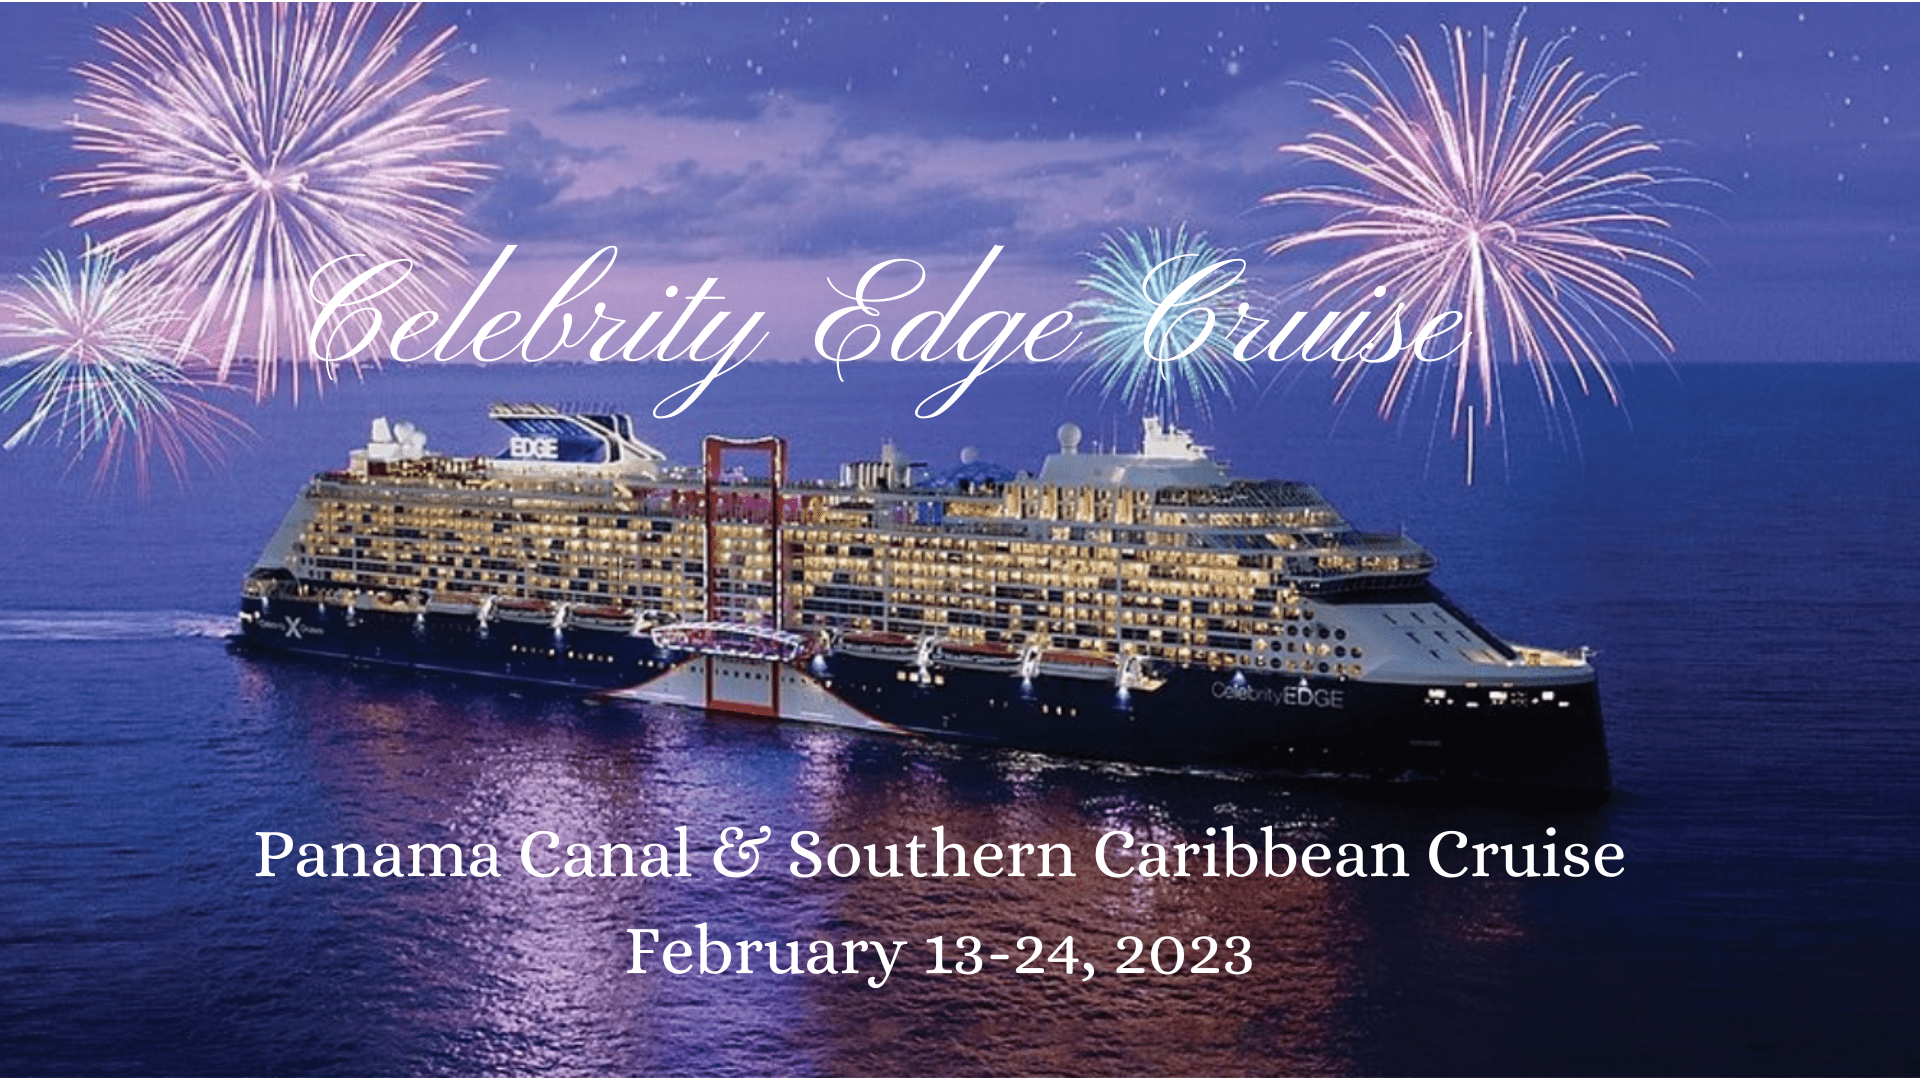 Celebrity edge cruise banner with sparkles